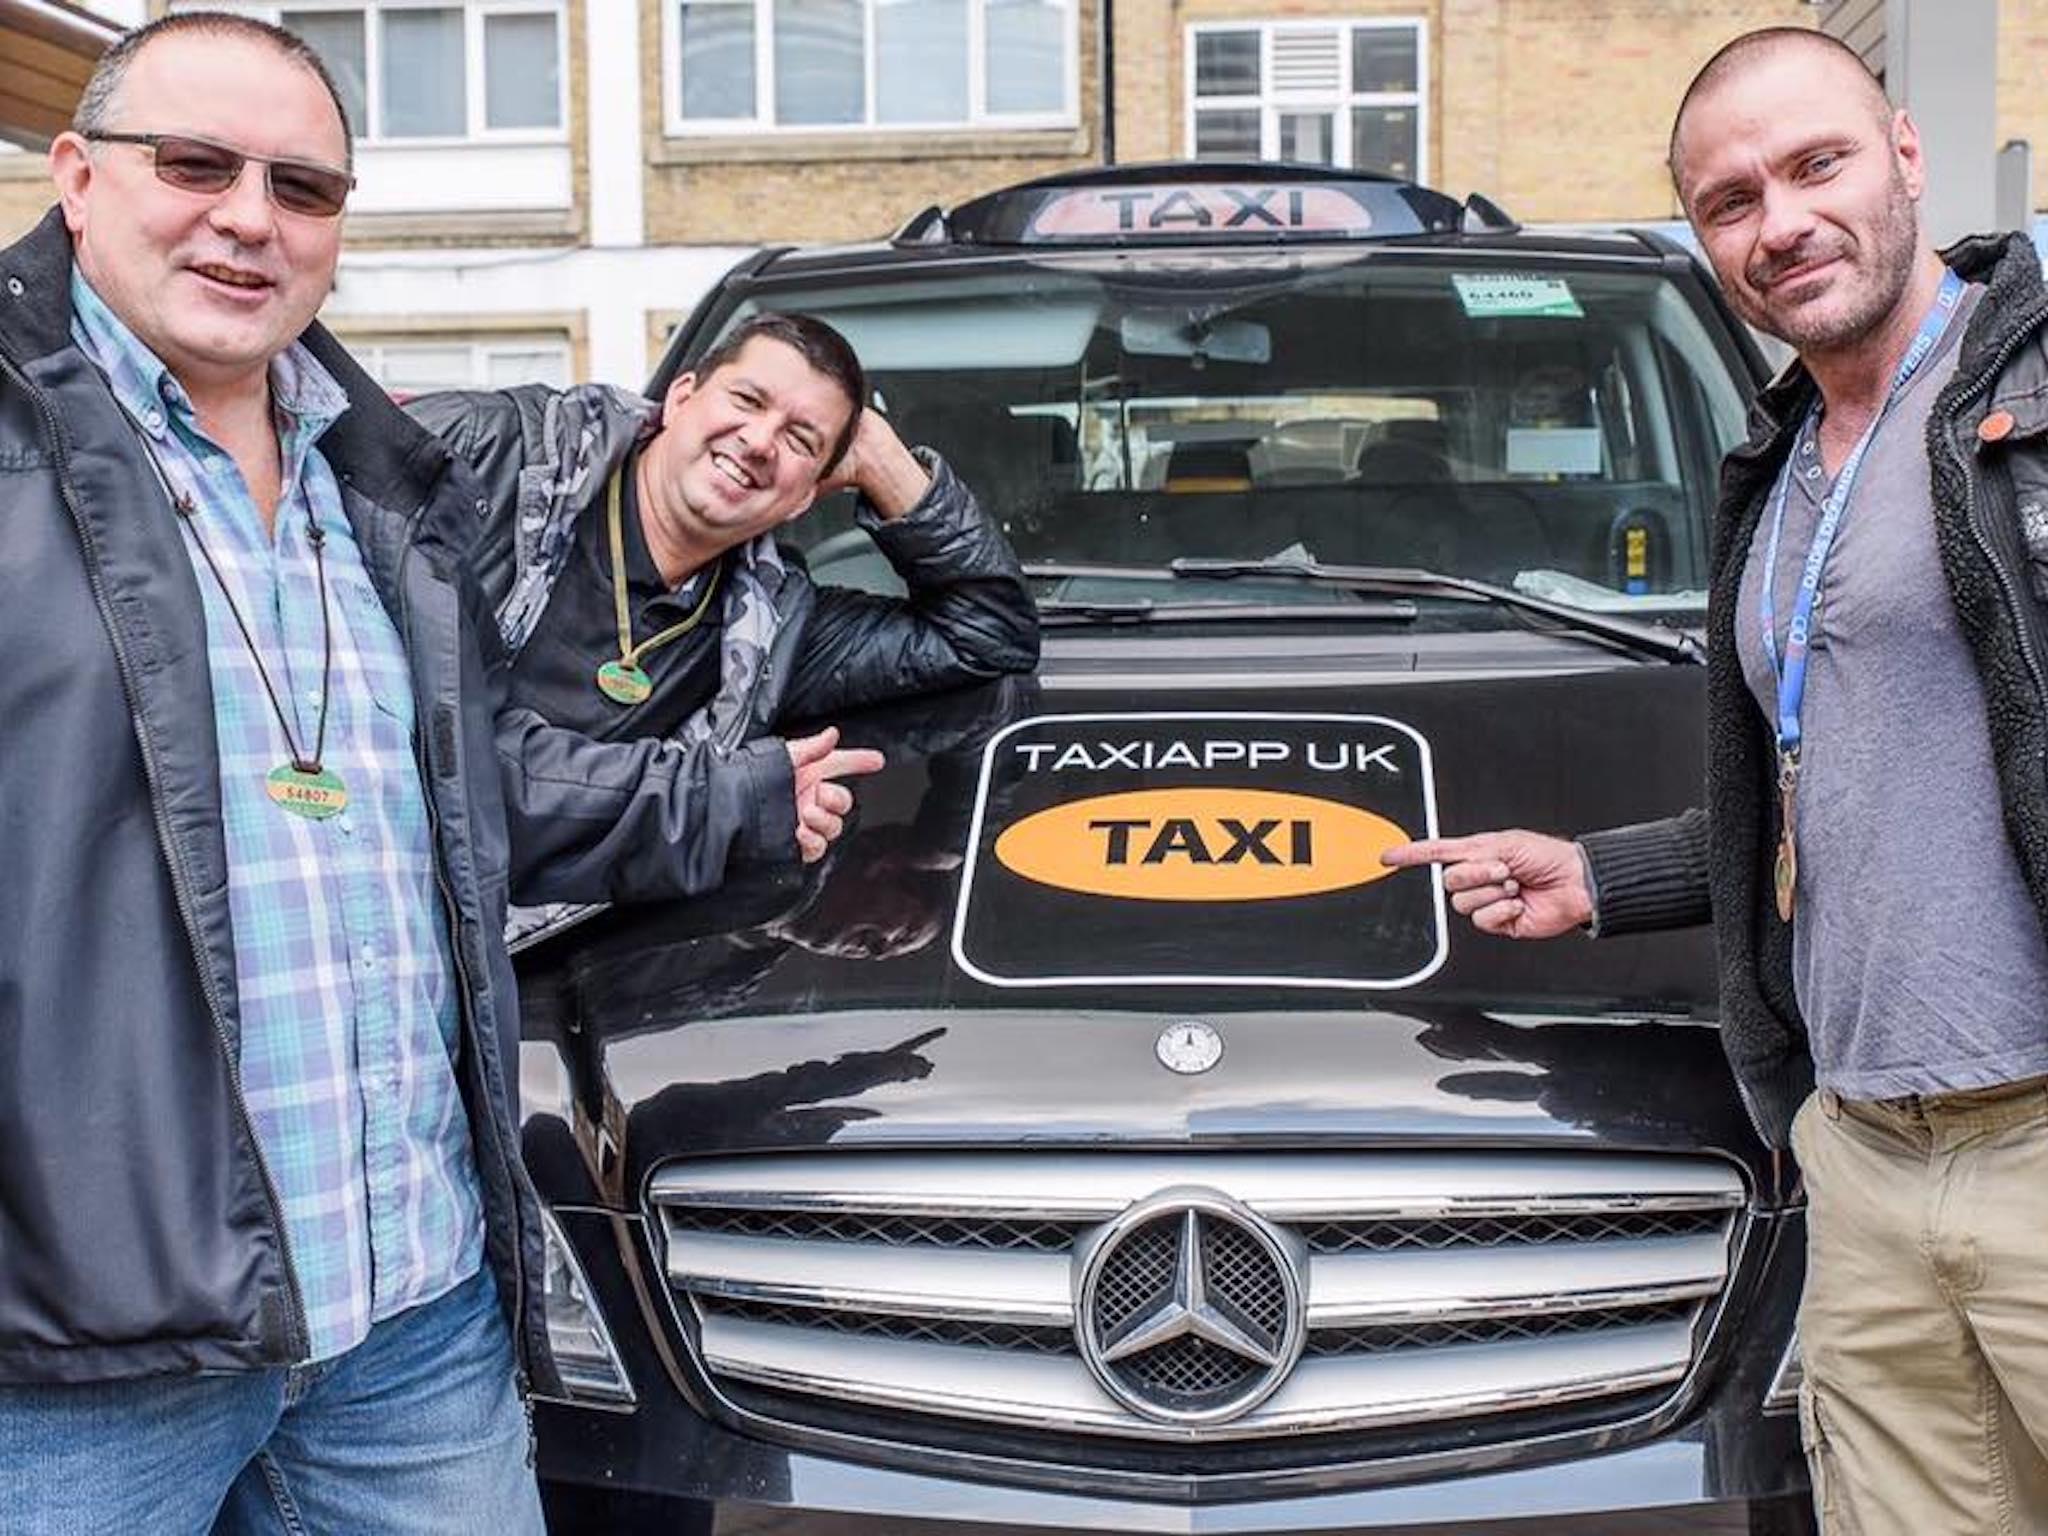 Founders and members of the Taxiapp co-operative: Scott Walsey, David Garness and Sean Paul Day